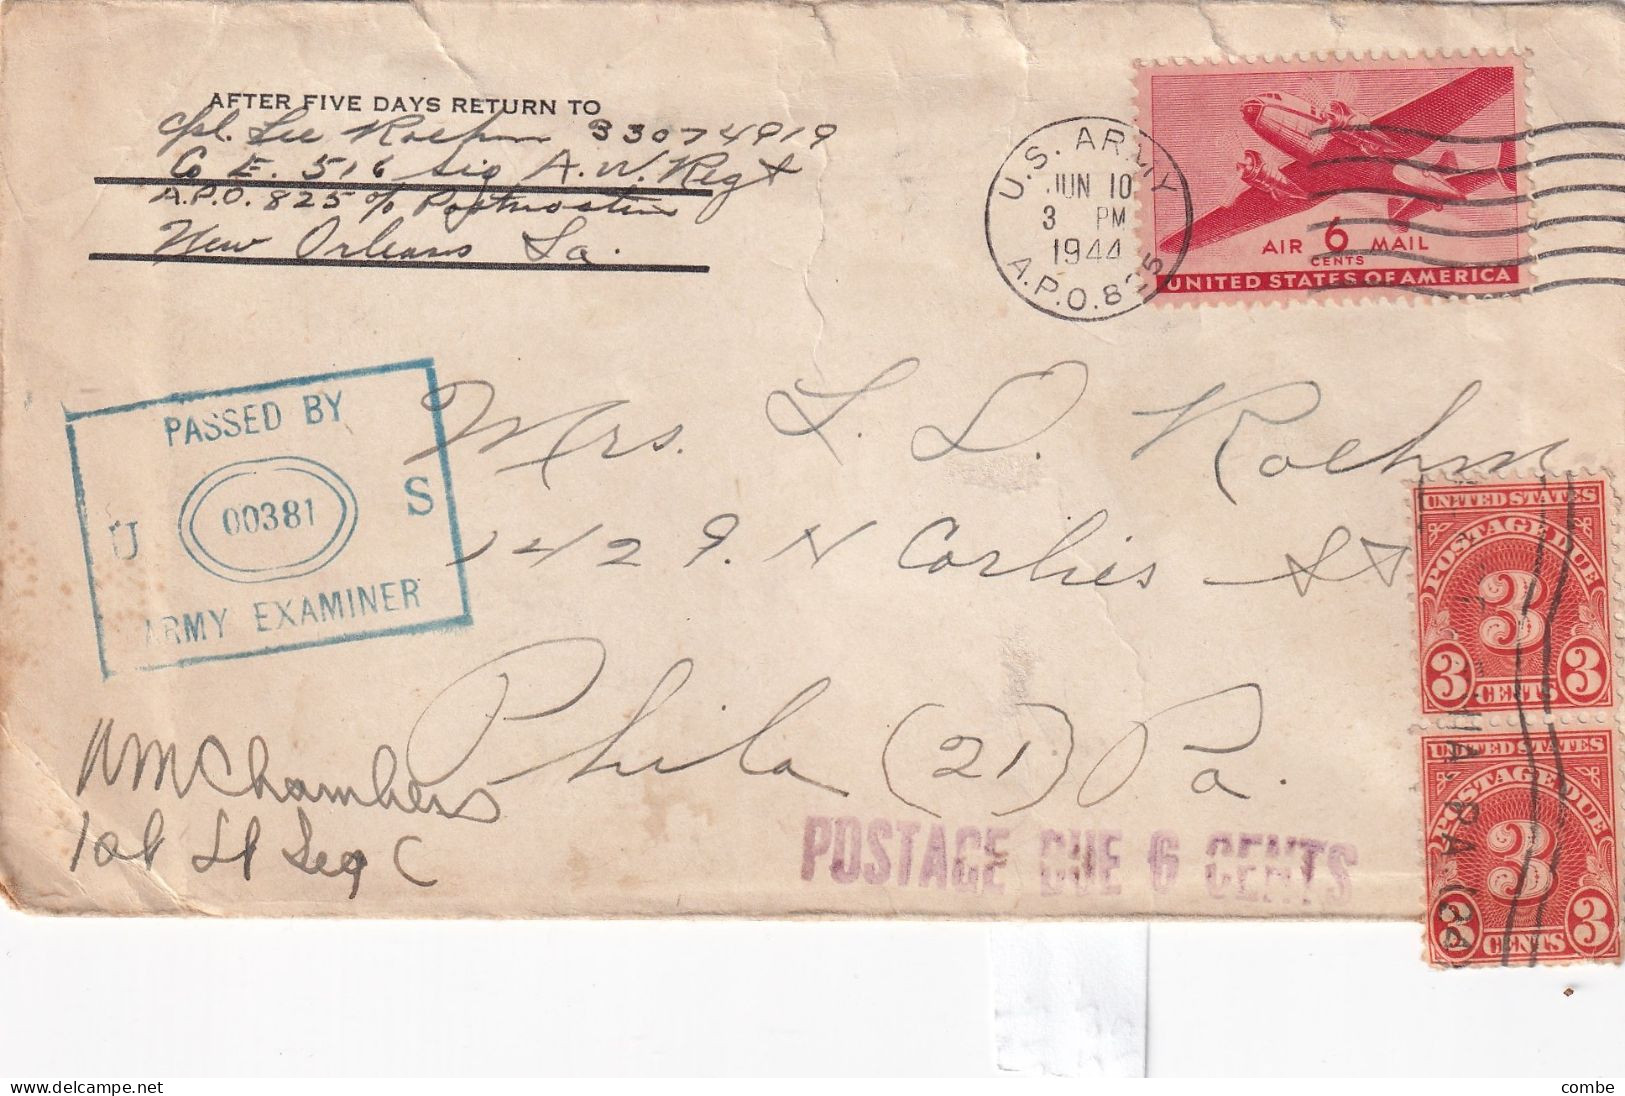 COVER US. 3 JUN 1944. APO 825. ALBROOK FIELD. CANAL ZONE. TO PHILA. PASSED BY EXAMINER. POSTAGE DUE 6 CENTS - Cartas & Documentos